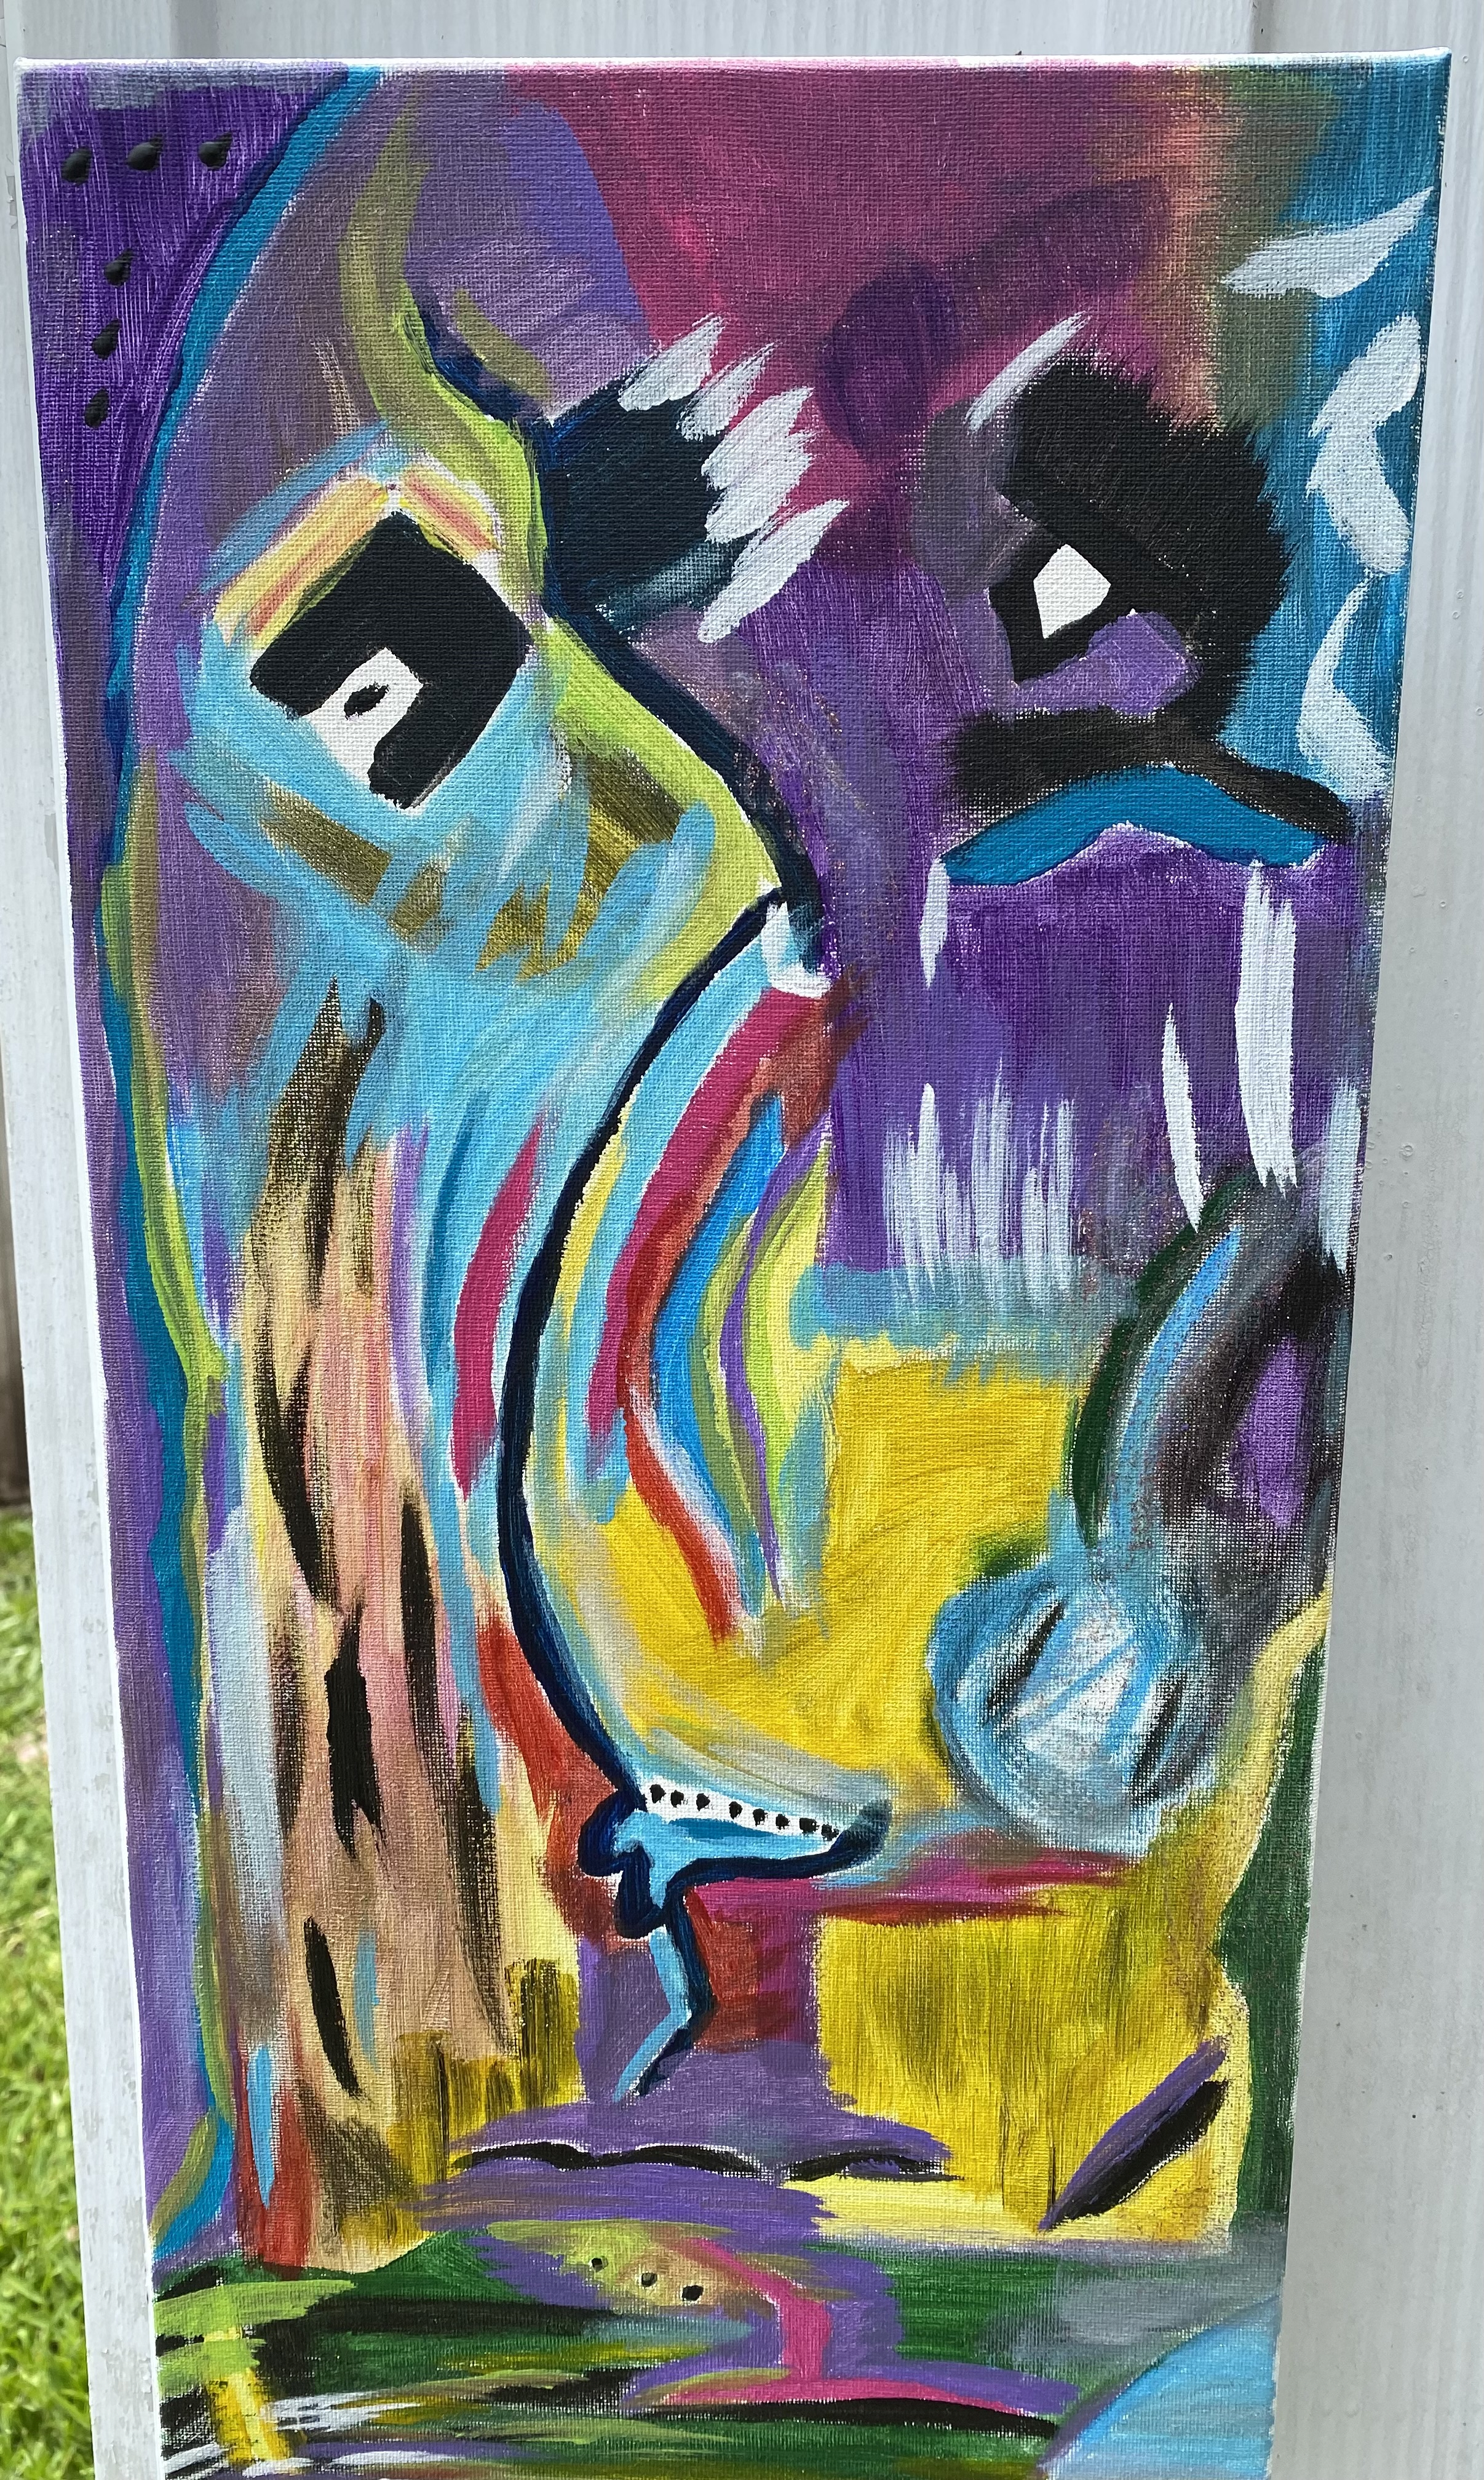 10in x 20in artist's loft canvas with an abstract colorful face. brush strokes were rapid and fast. the stroke were made up of the following colors: violet, yellow, nude, pink, azul blue, hunter green, white, brilliant red, and black. 